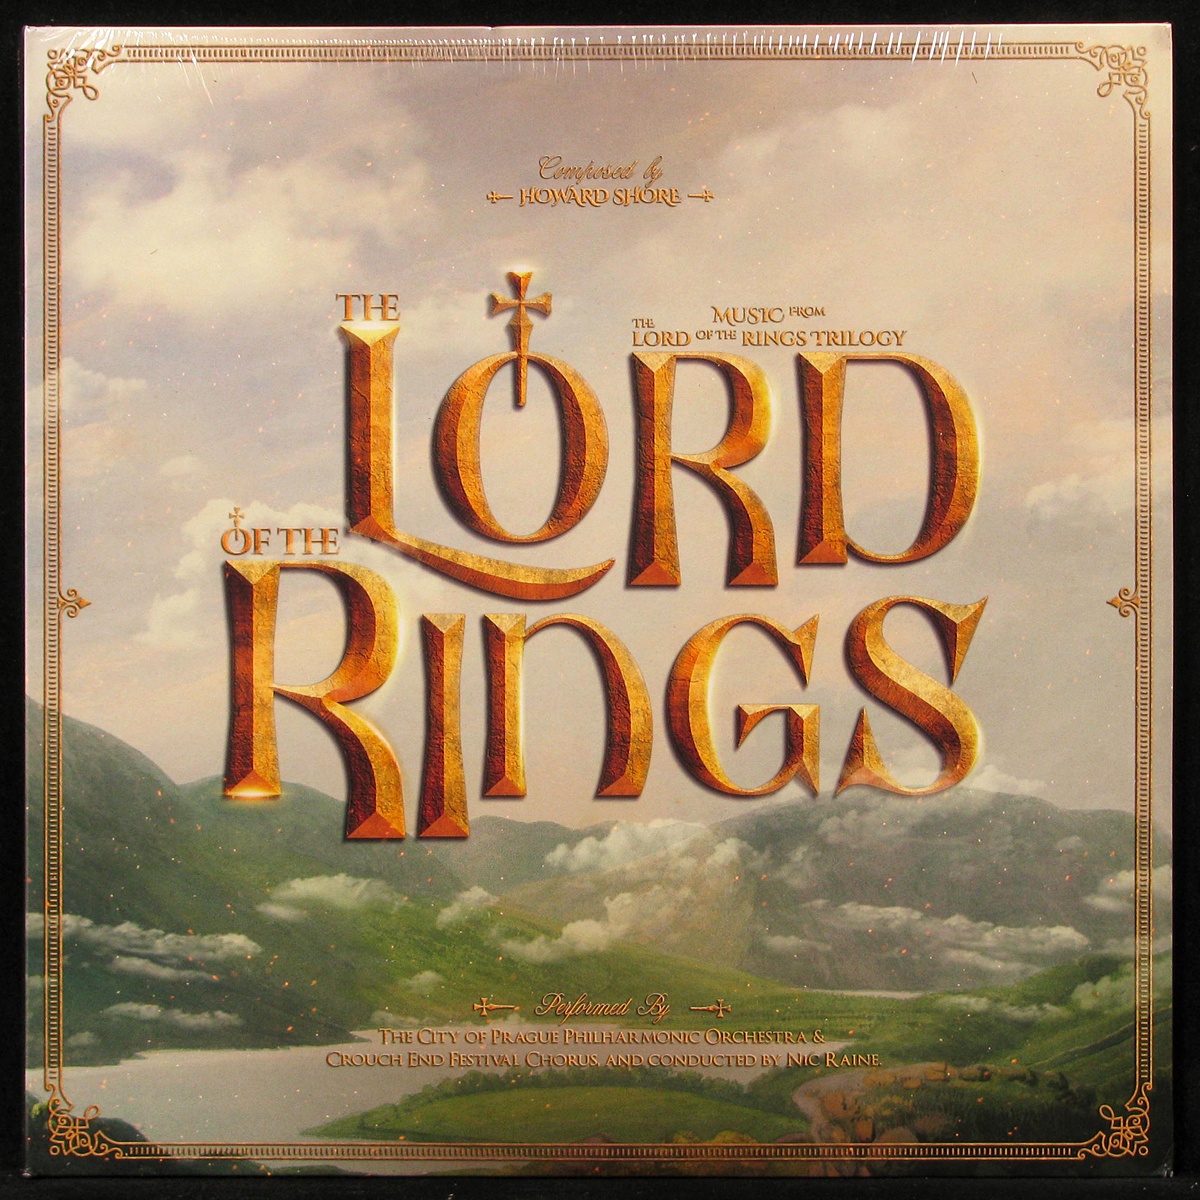 LP Nic Raine / City Of Prague Philharmonic Orchestra — Music From The Lord Of The Rings Trilogy (3LP, coloured vinyl) фото